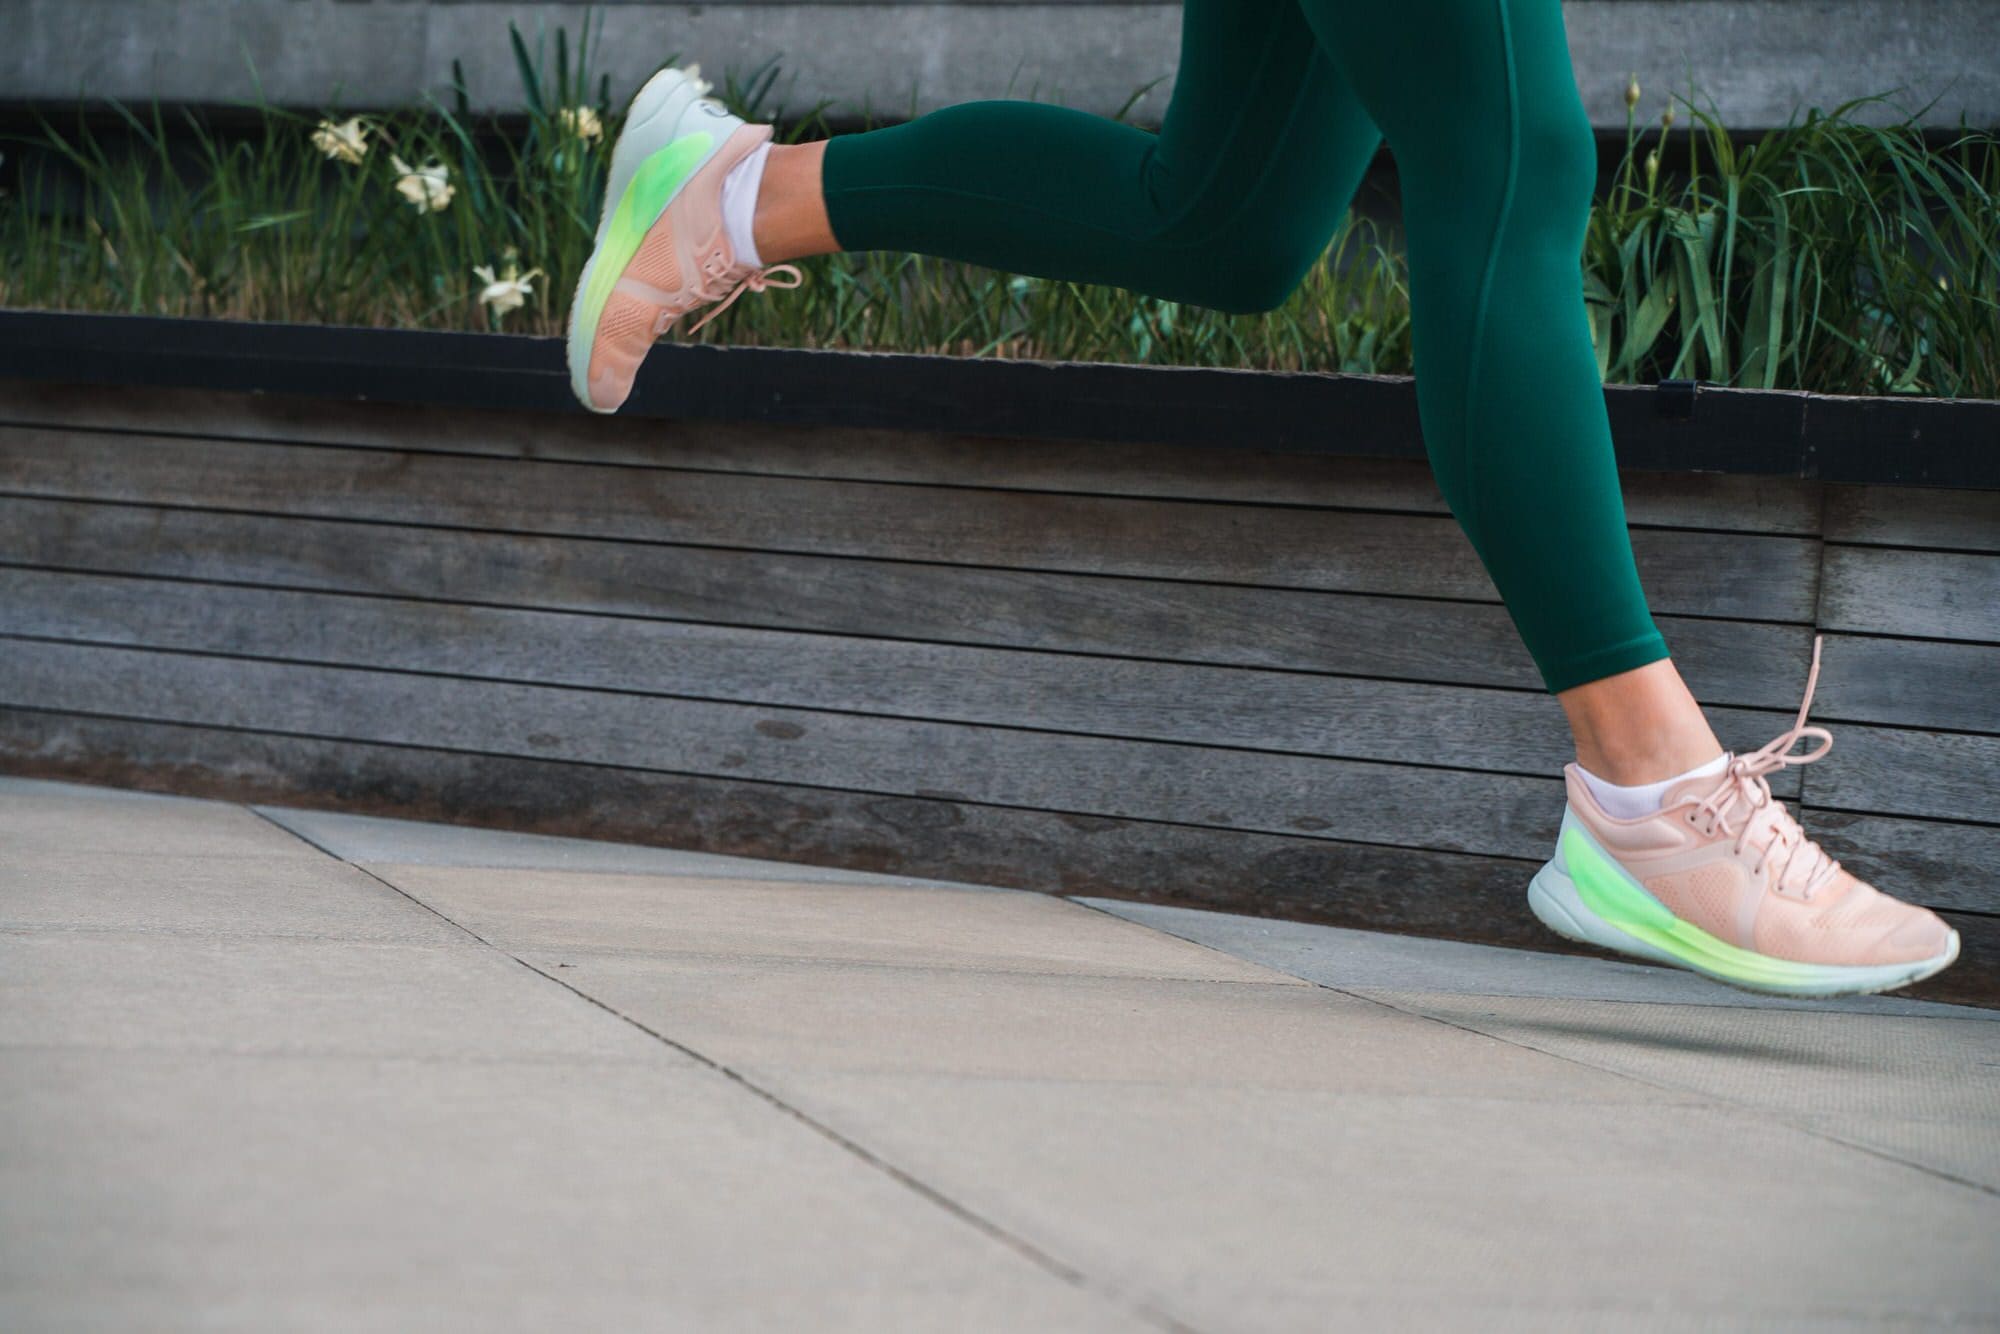 I Tried Lululemon's Blissfeel Running Shoes. Here's My Review - Chatelaine